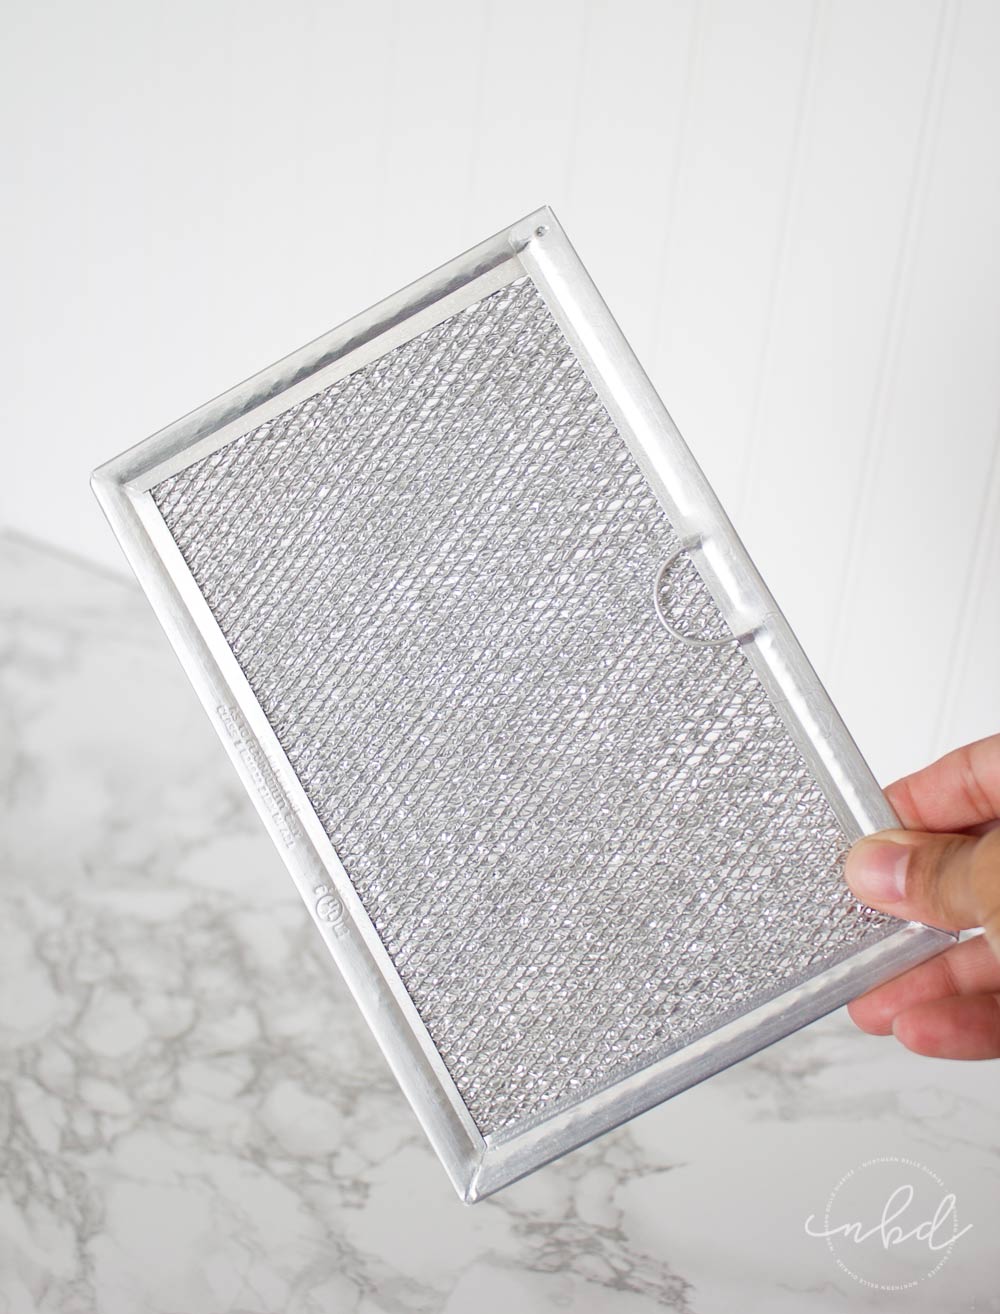 clean range hood filter without toxic chemicals